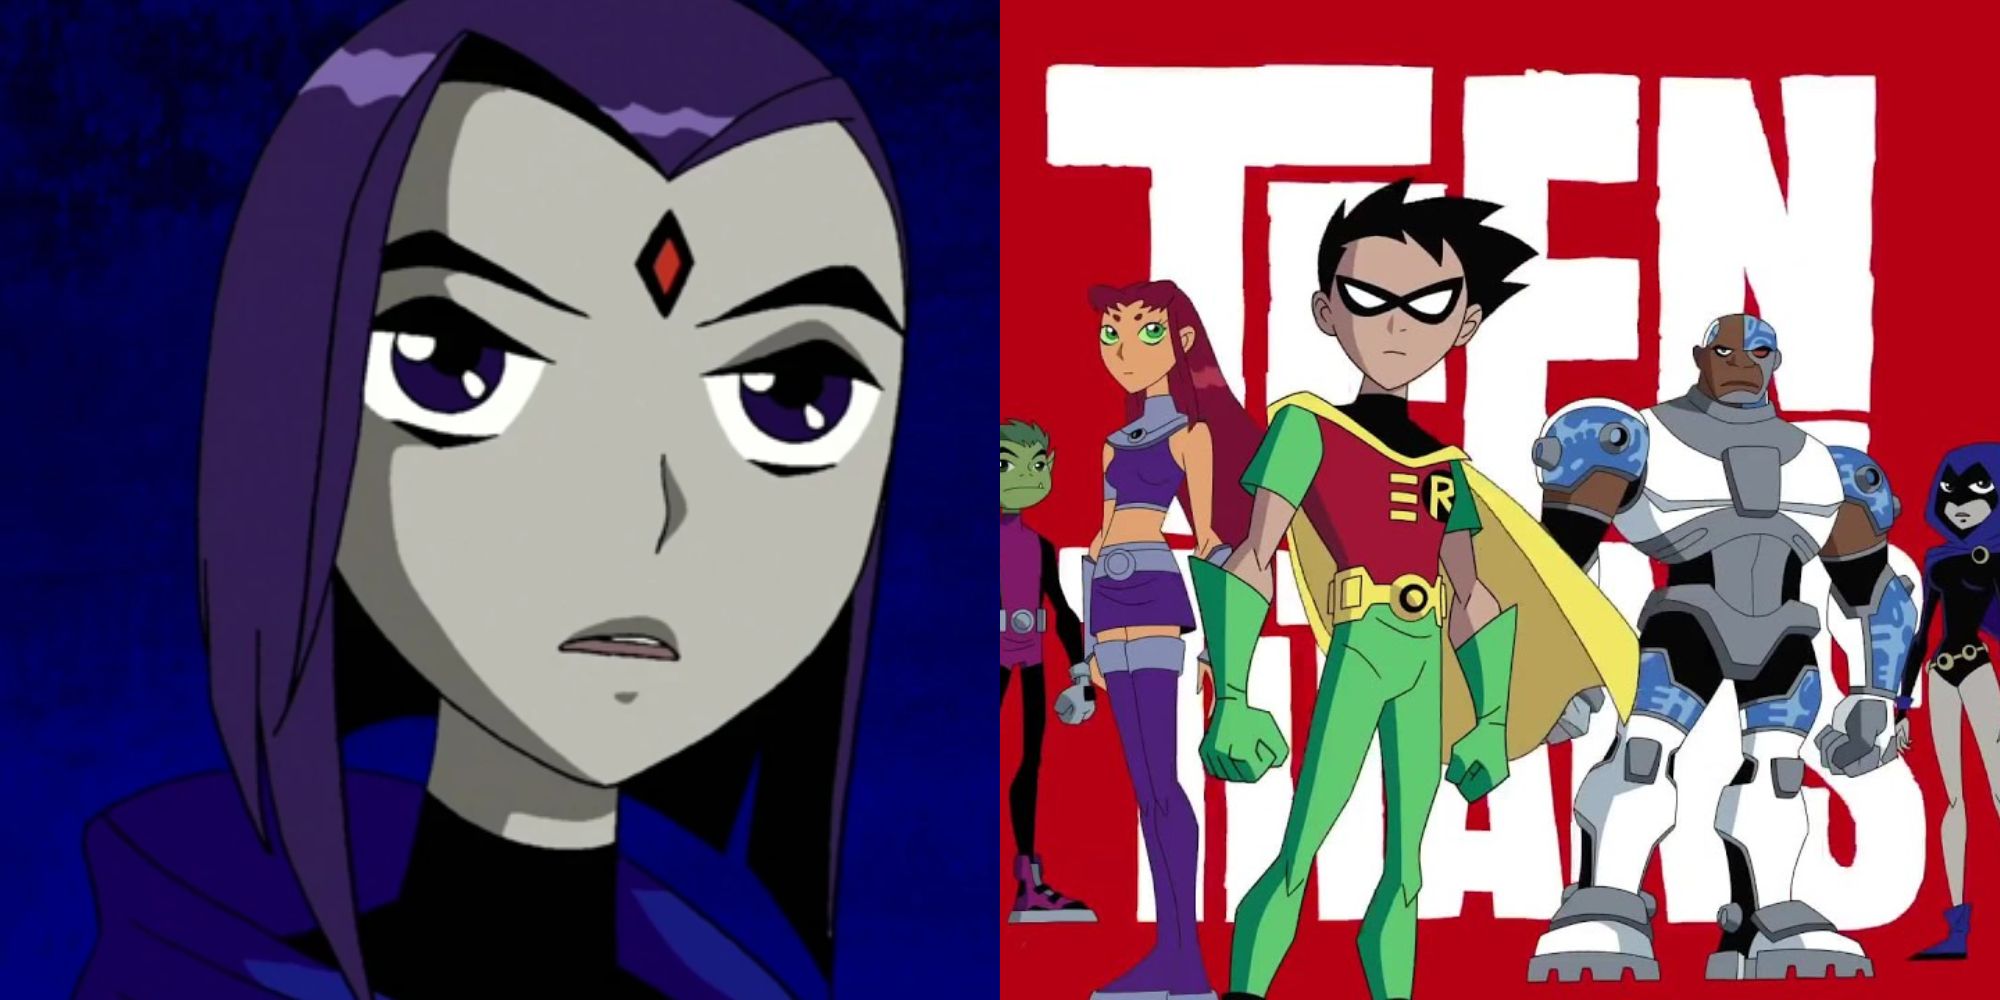 donald killingsworth recommends pics of raven from teen titans pic